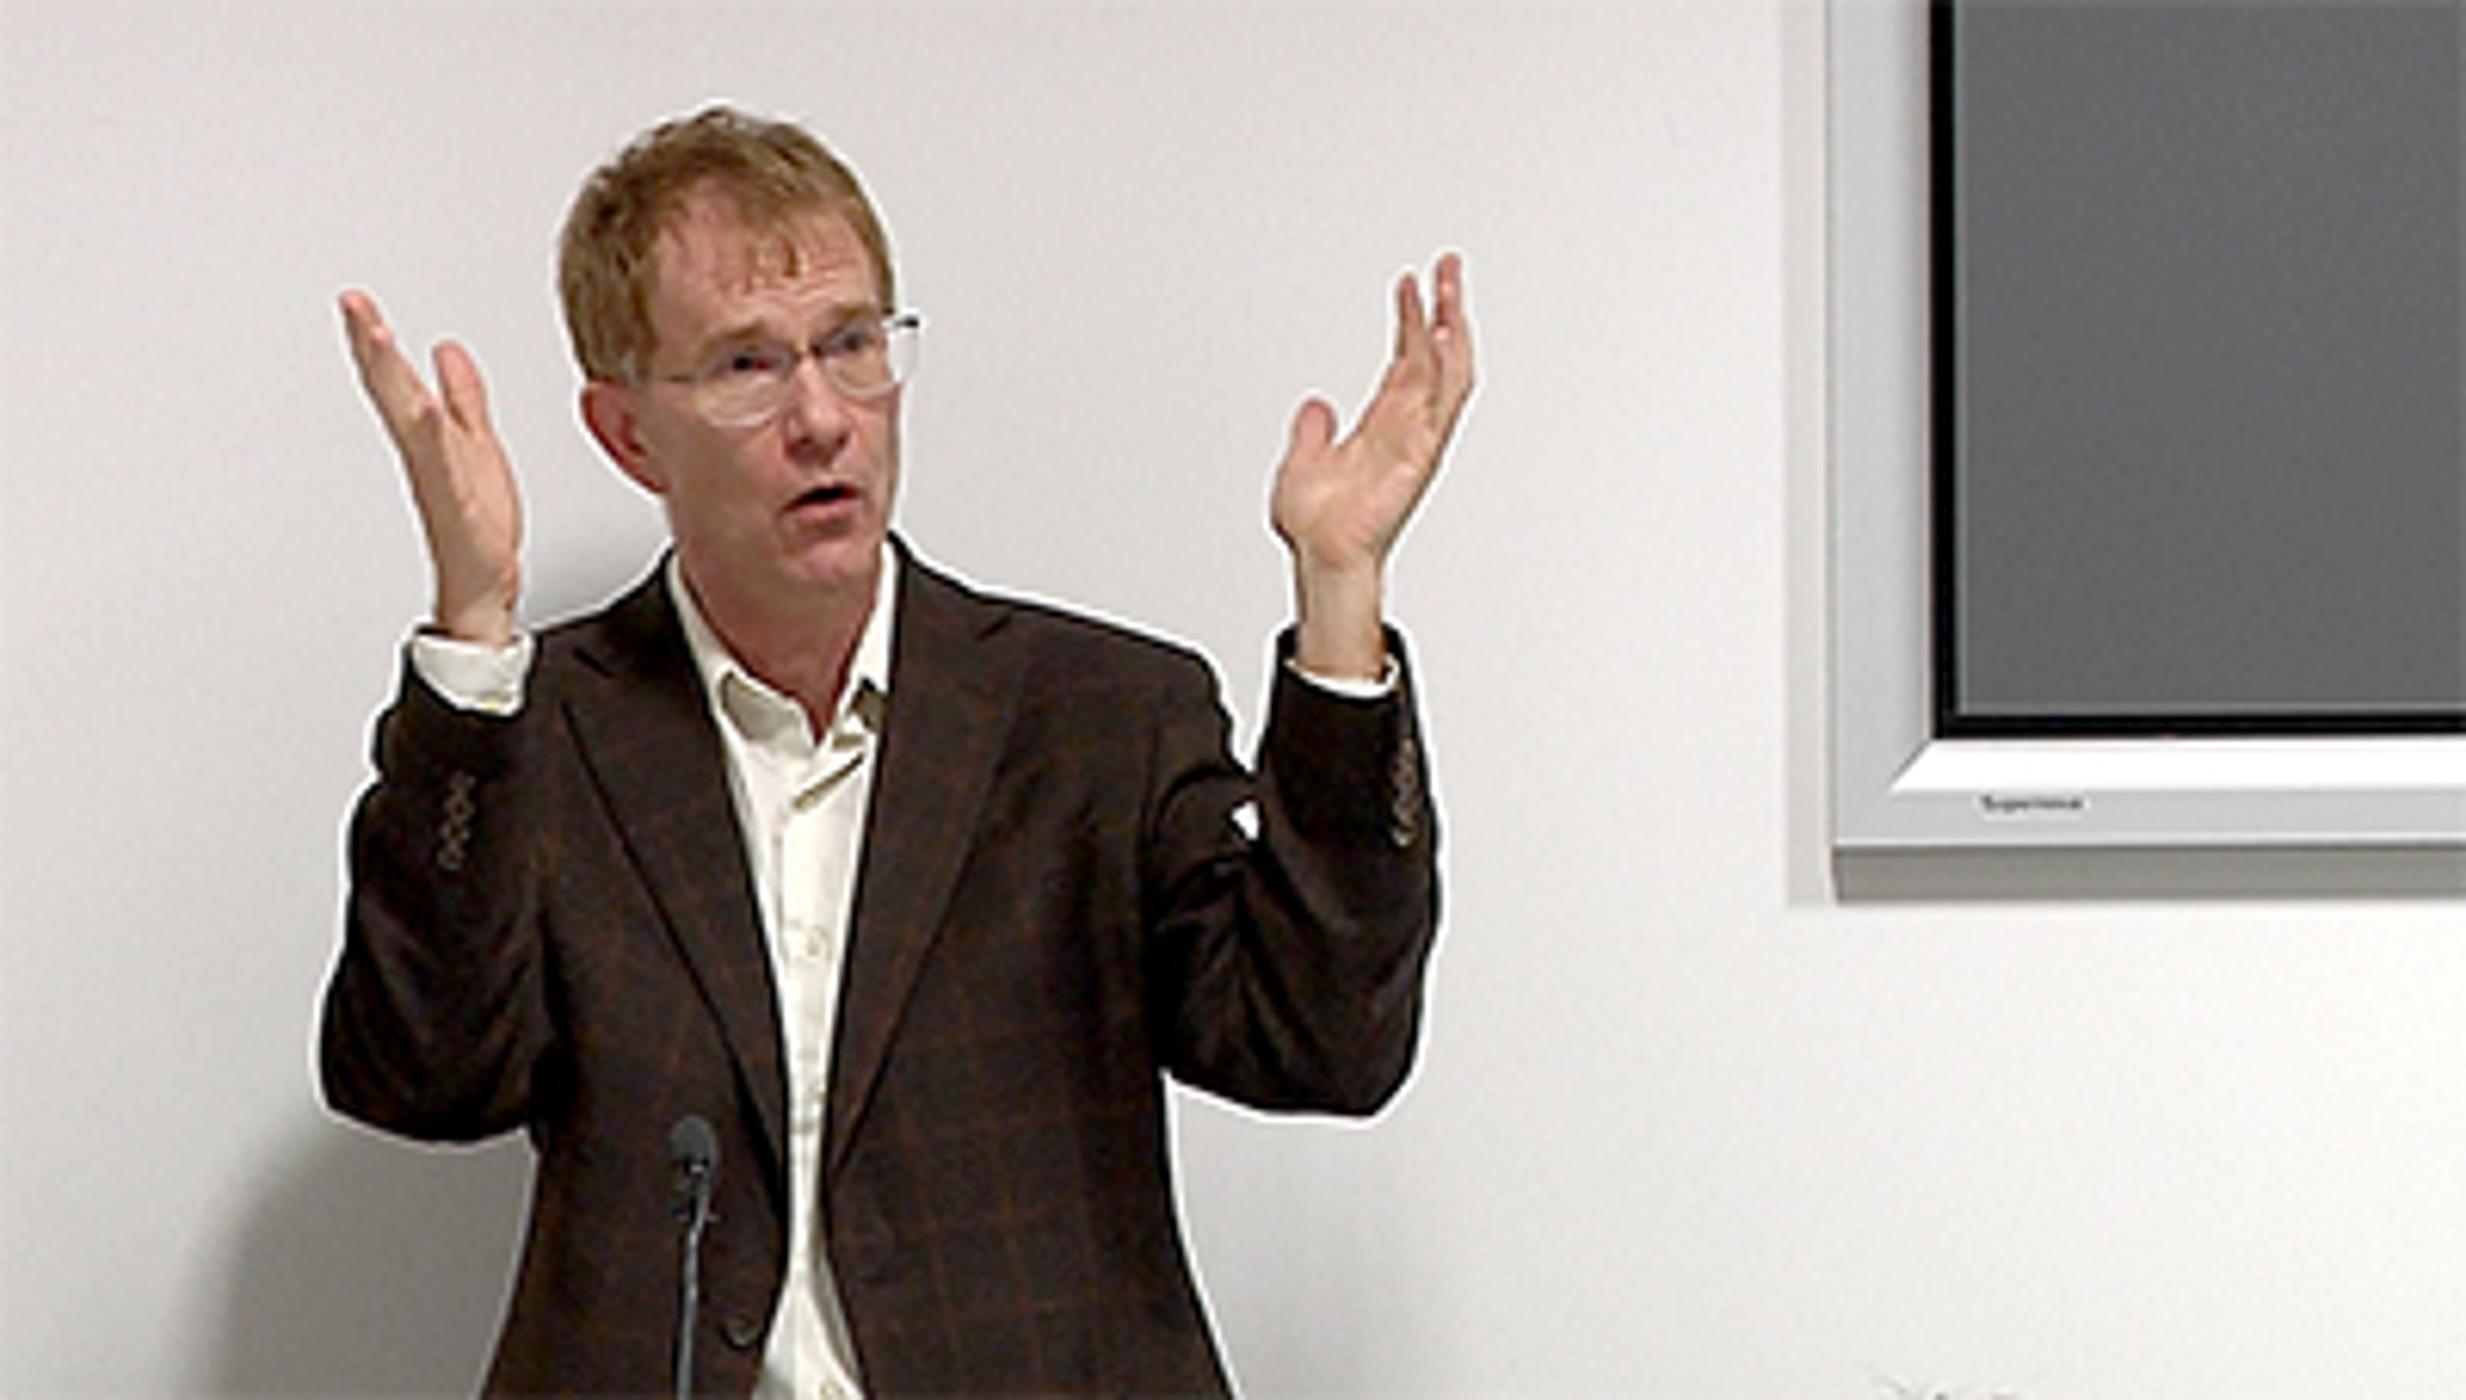 Professor Shaun Nichols - 12 March 2015 - What is the Nature of Human Morality?